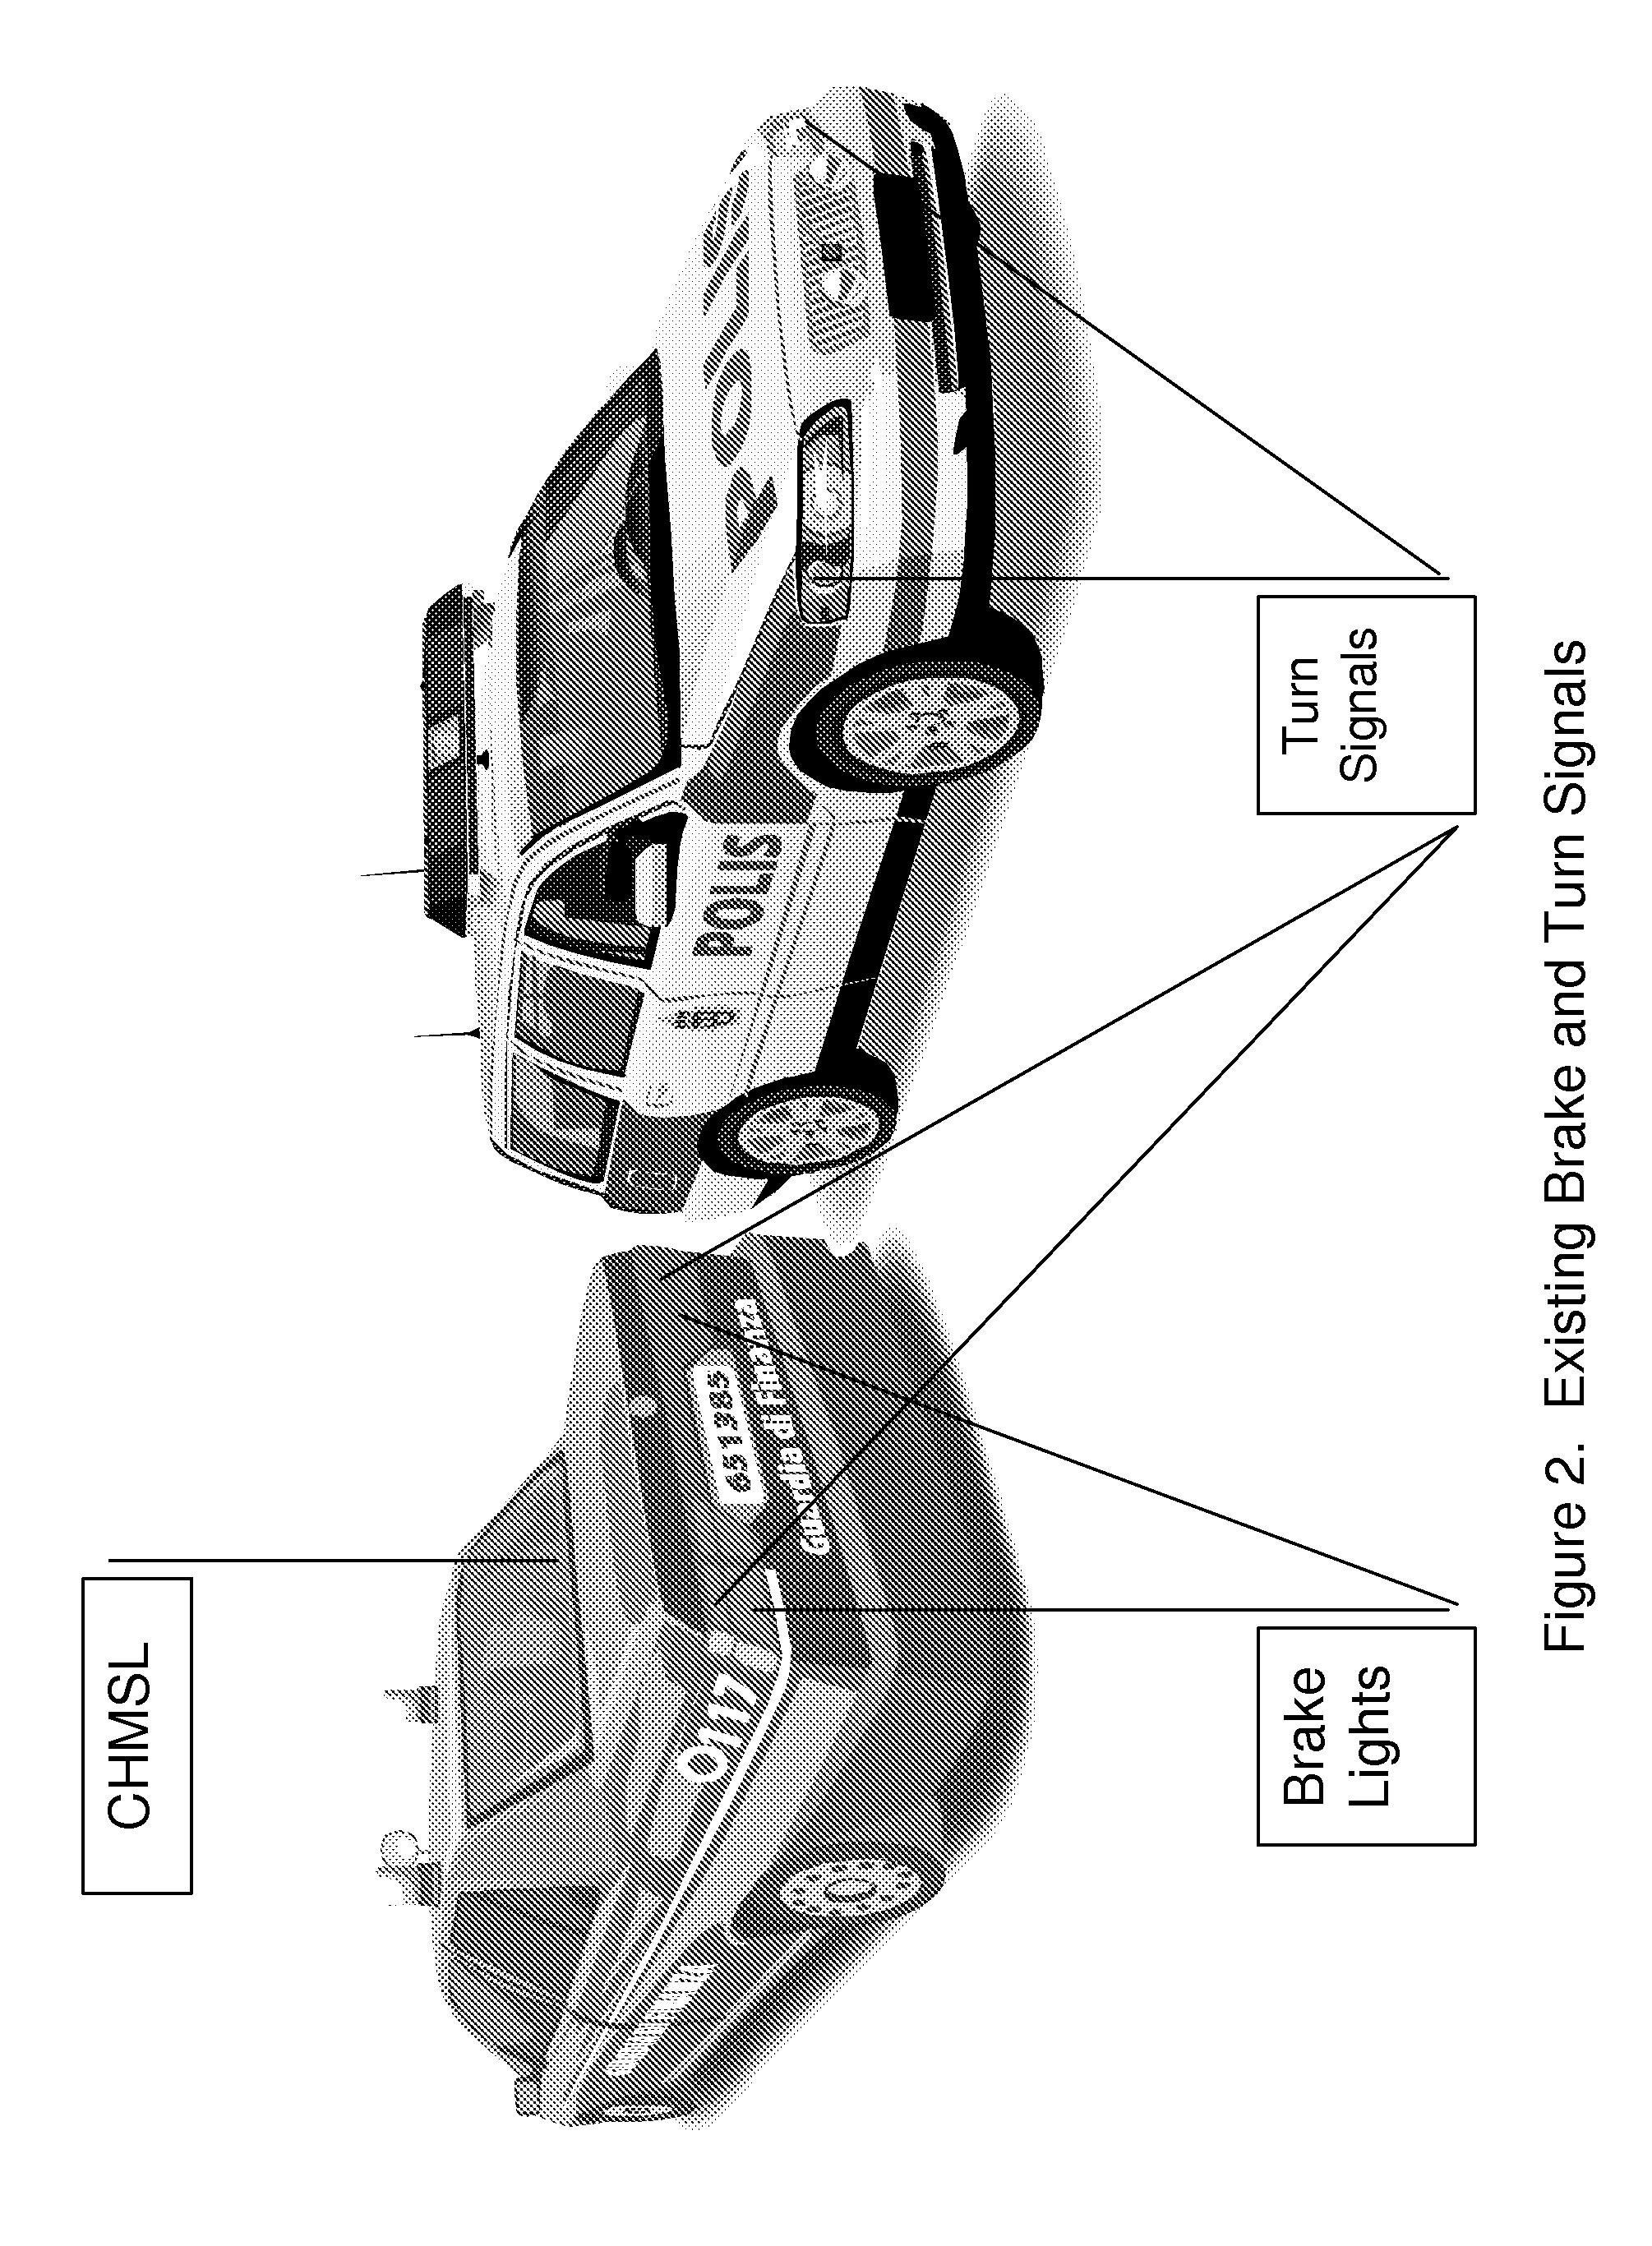 Method and apparatus to determine vehicle intent